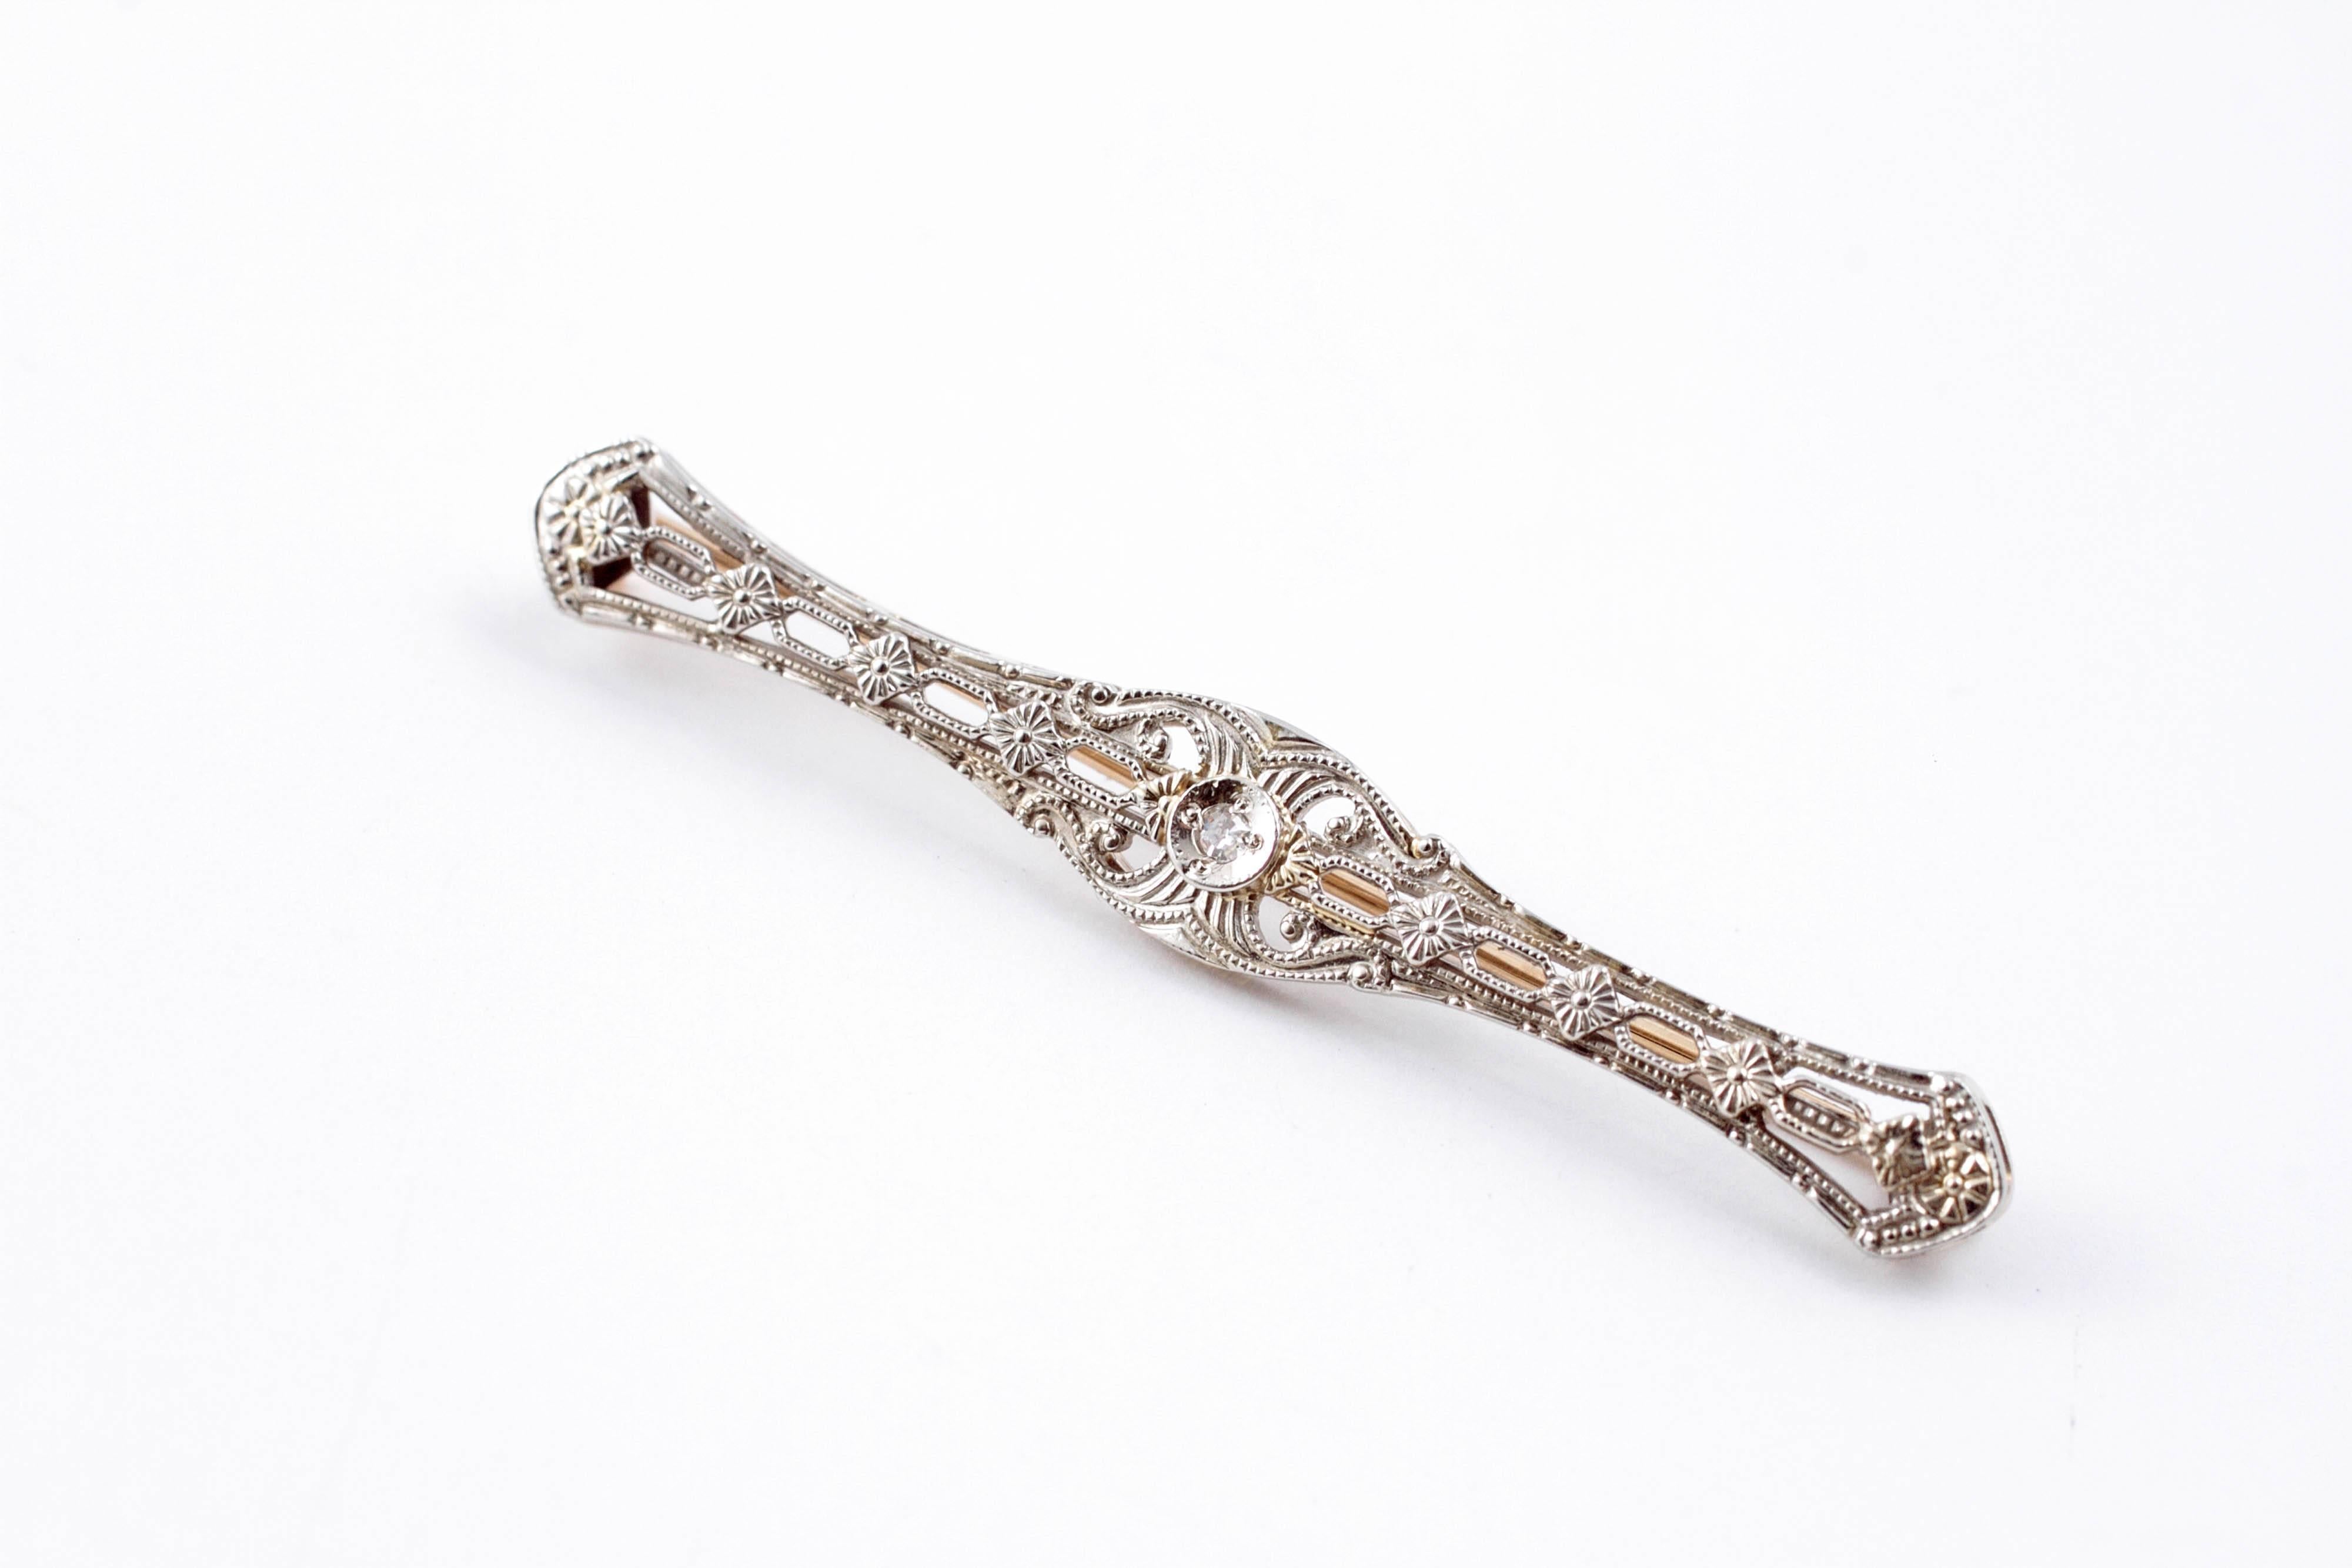 Intricate diamond bar pin set in 14 Karat yellow and white gold.  Measuring approximately 2 1/4 inches in length. 